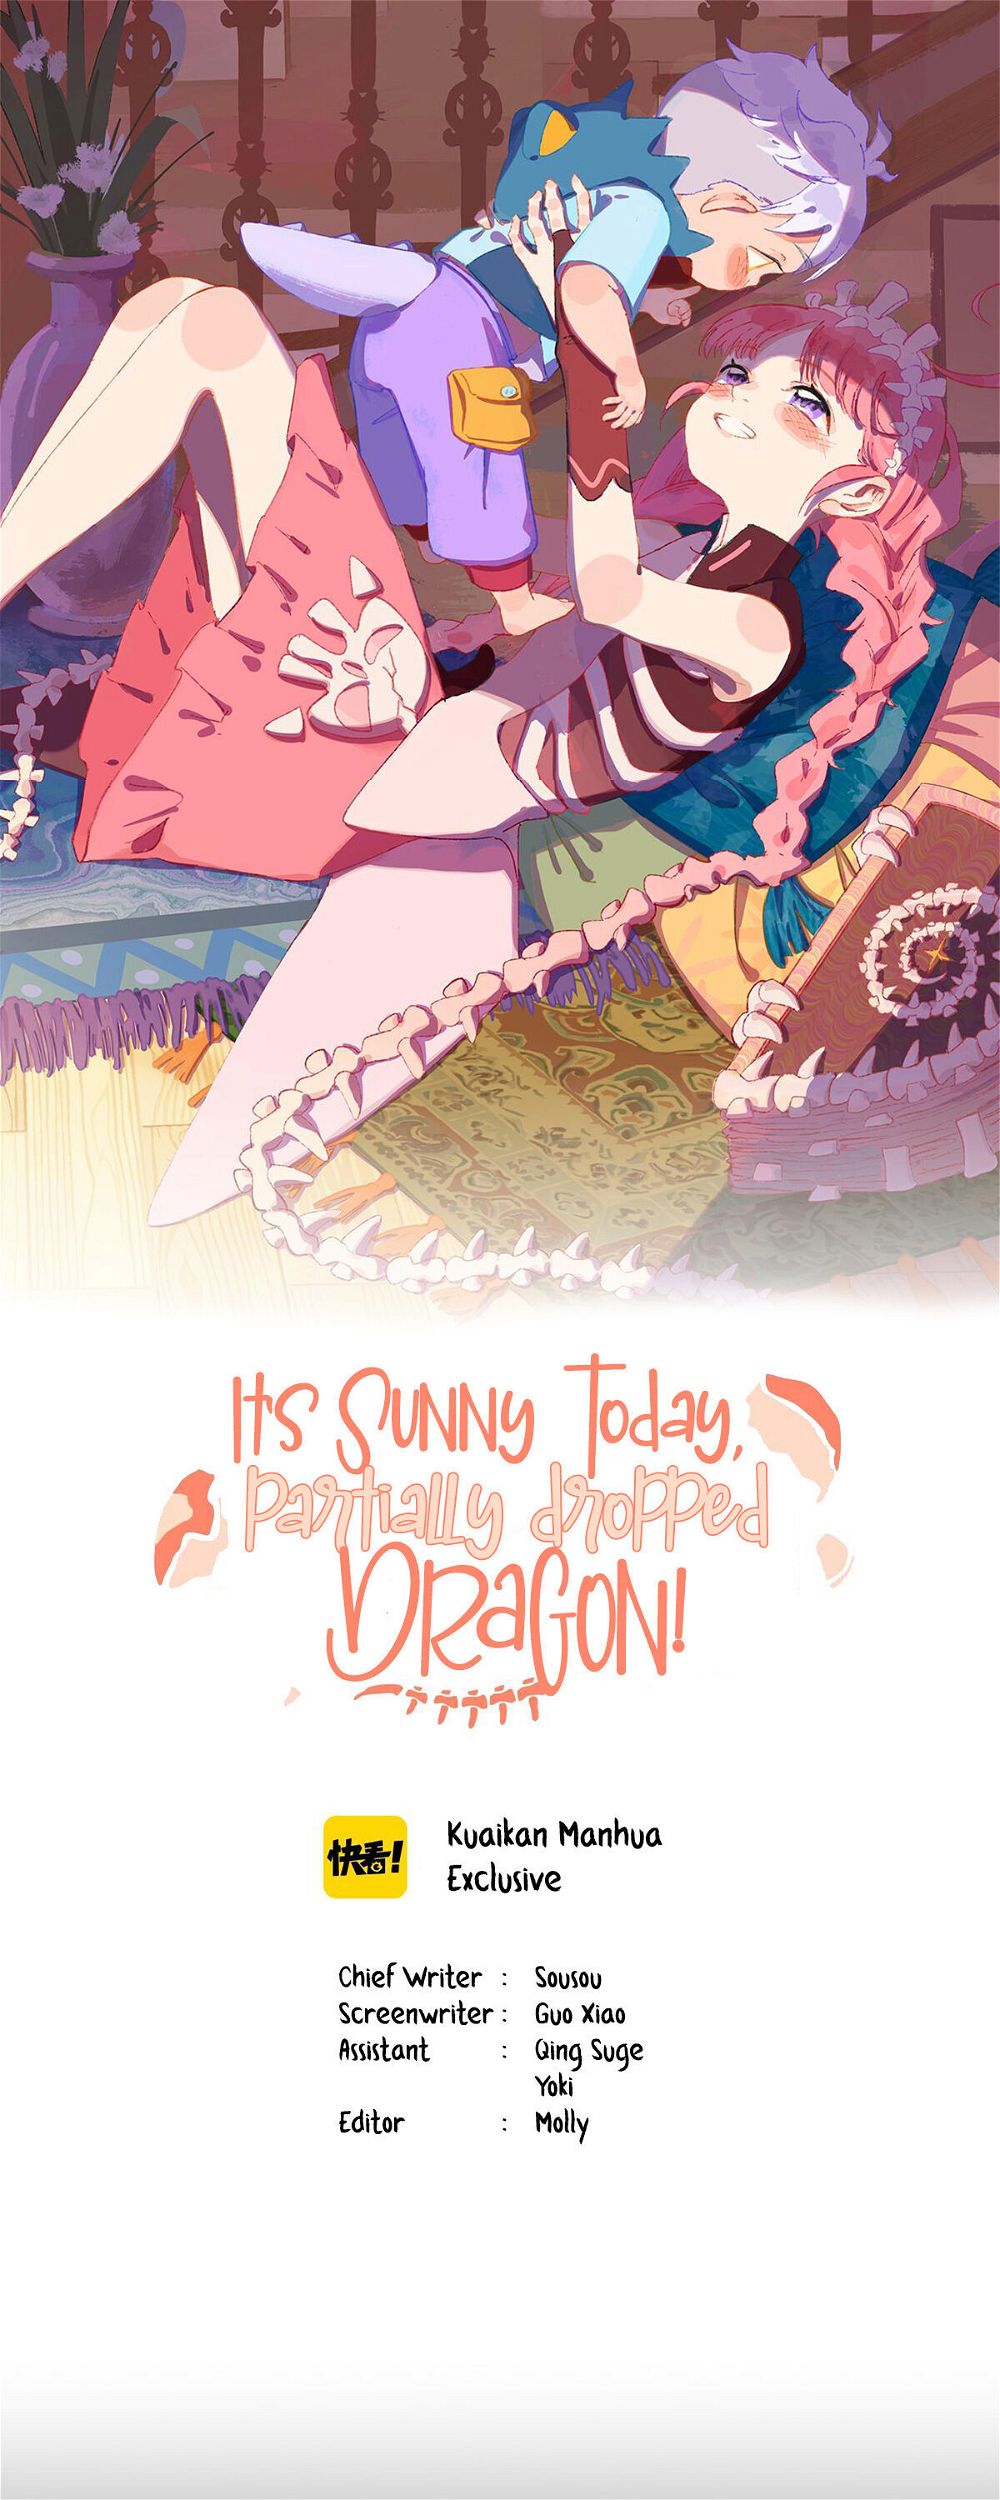 It’s Sunny Today, Partially Dropped Dragon! Chapter 1 - Page 1